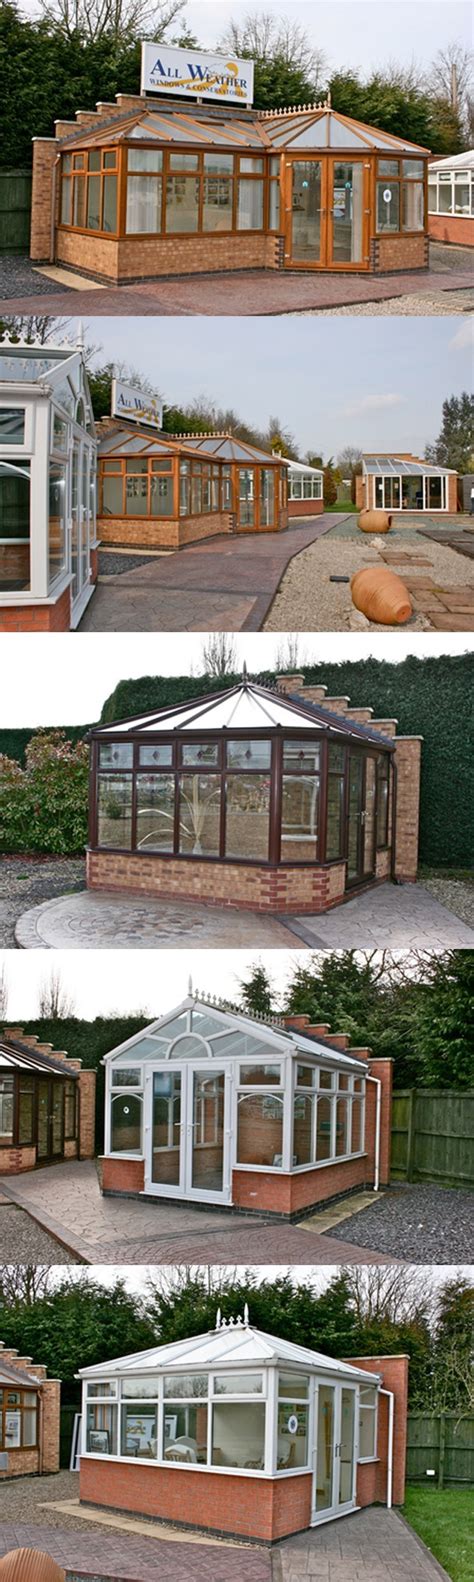 All Weather Windows Conservatory Showroom